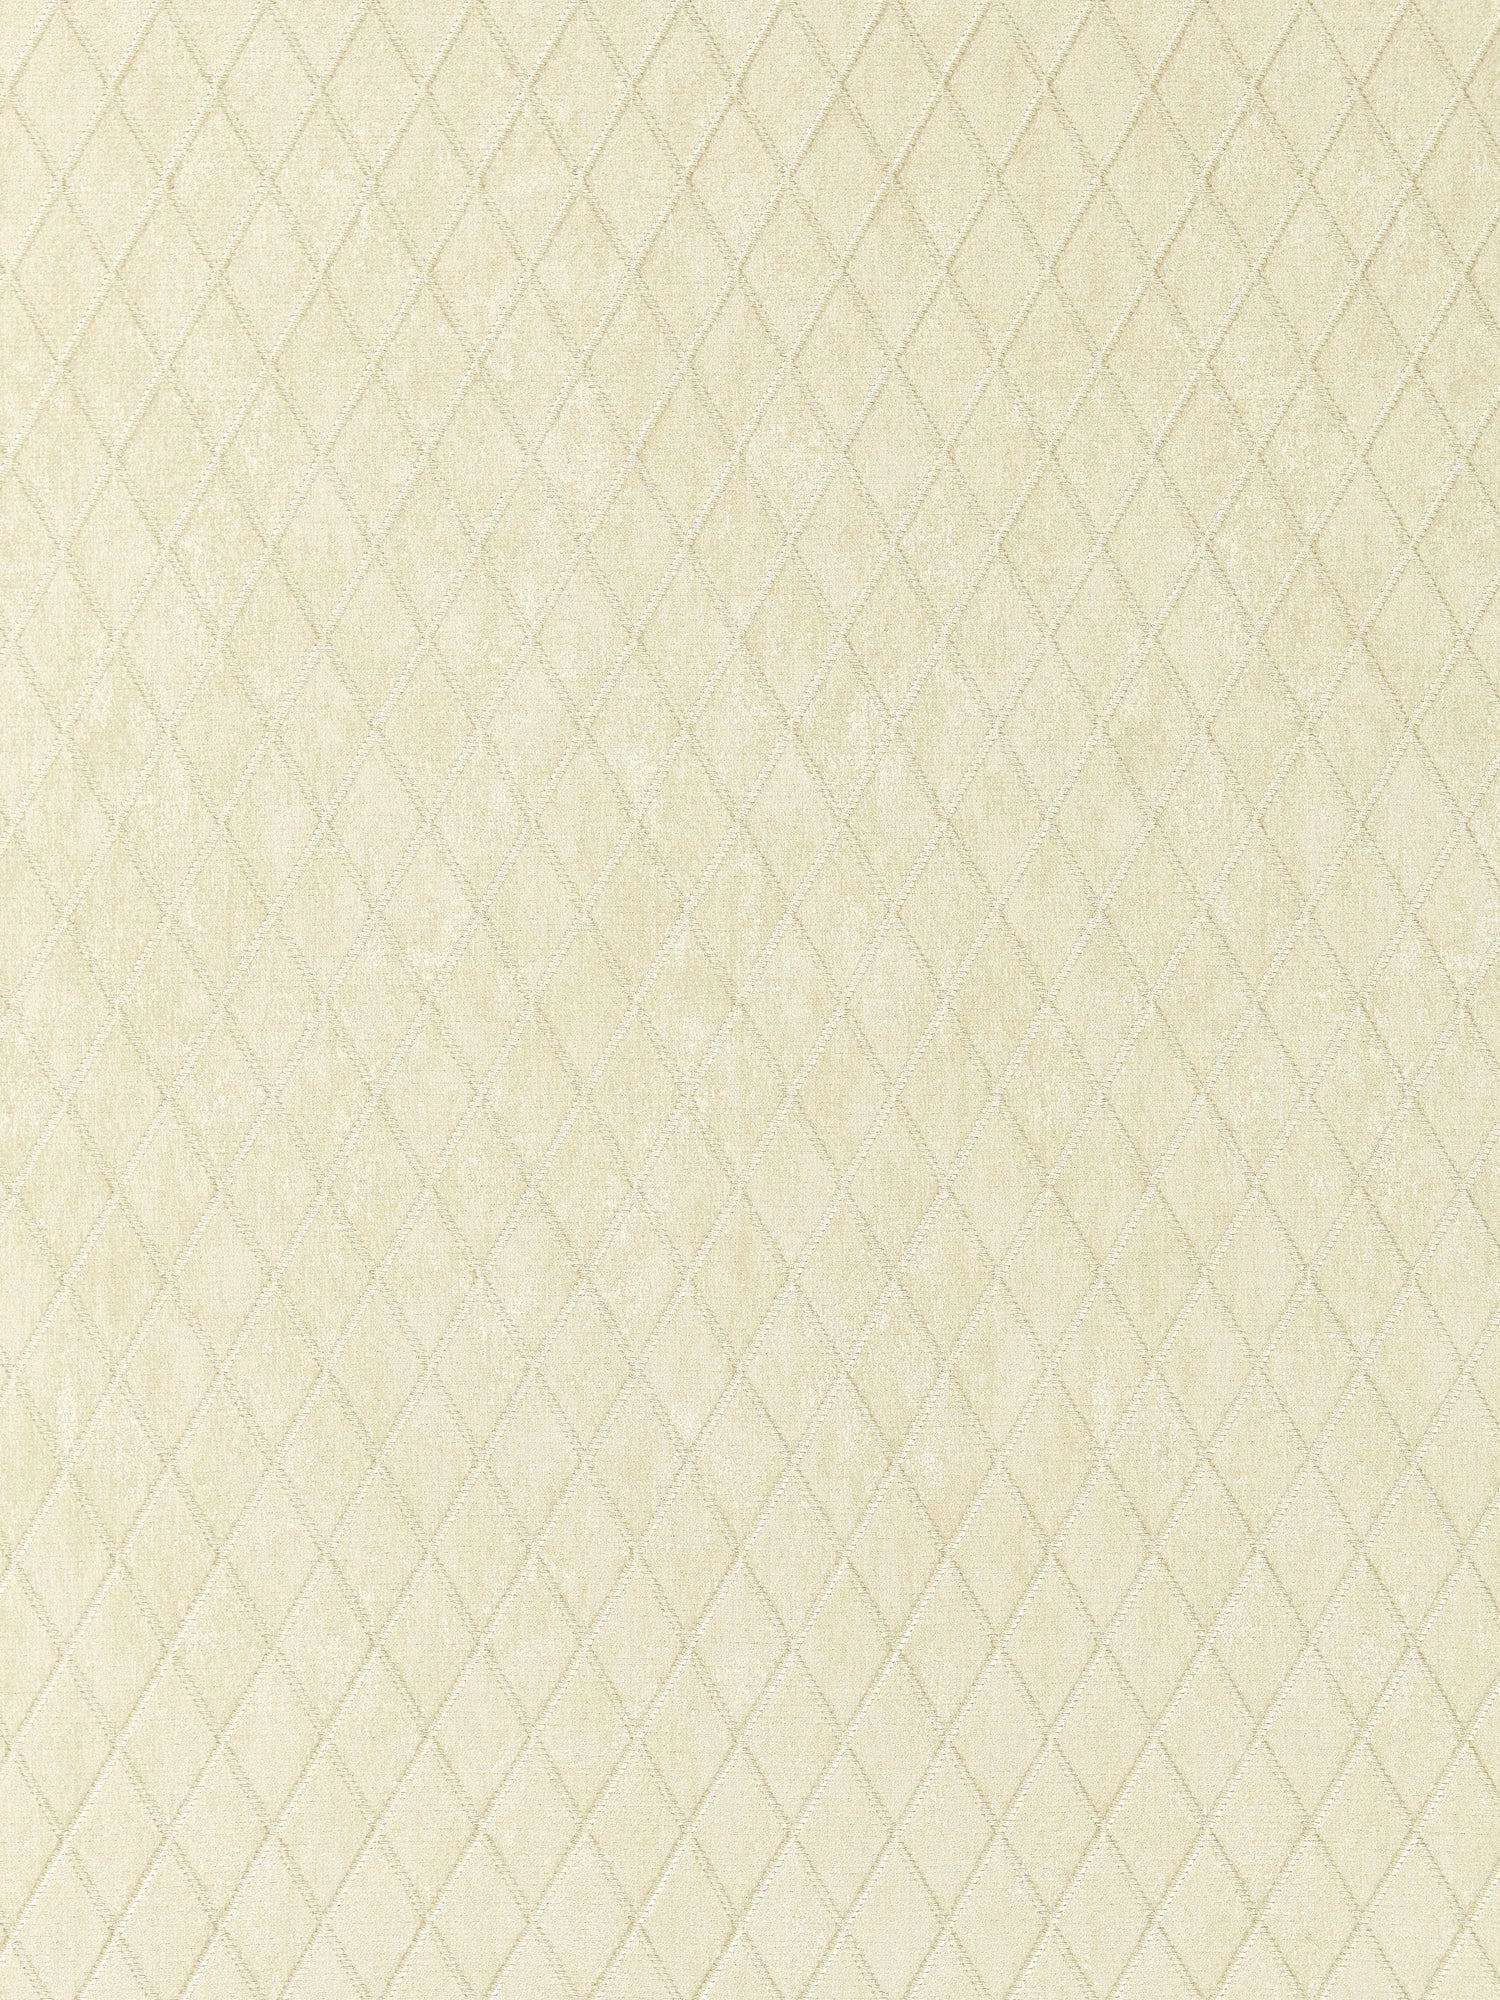 Diamond Weave fabric in putty color - pattern number SC 000227143 - by Scalamandre in the Scalamandre Fabrics Book 1 collection